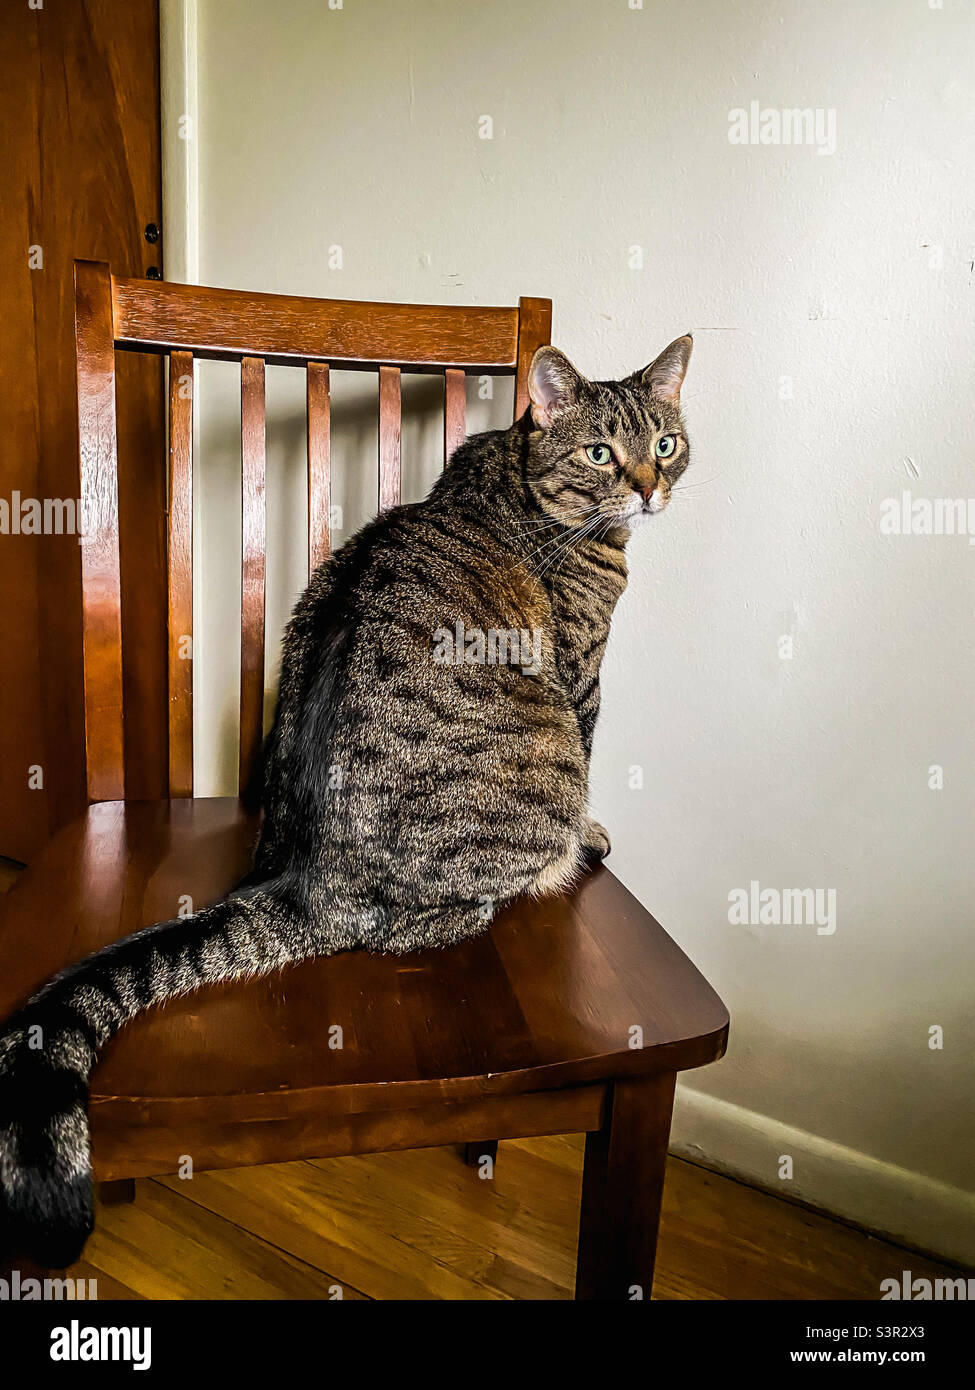 Tabby cat on wooden chair Stock Photo